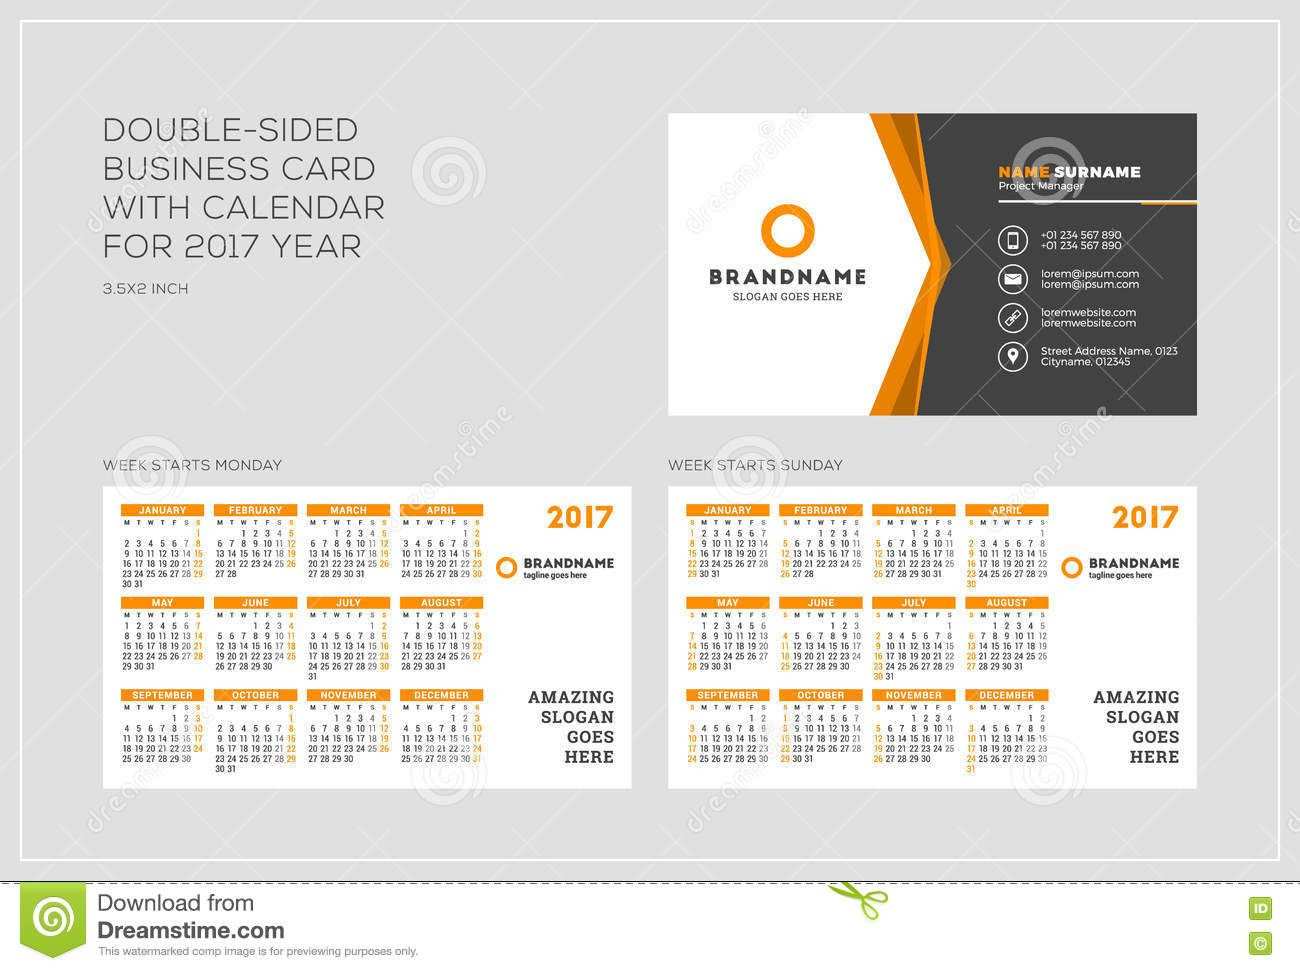 75 Free 4 Sided Business Card Templates in Word by 4 Sided Business Card Templates